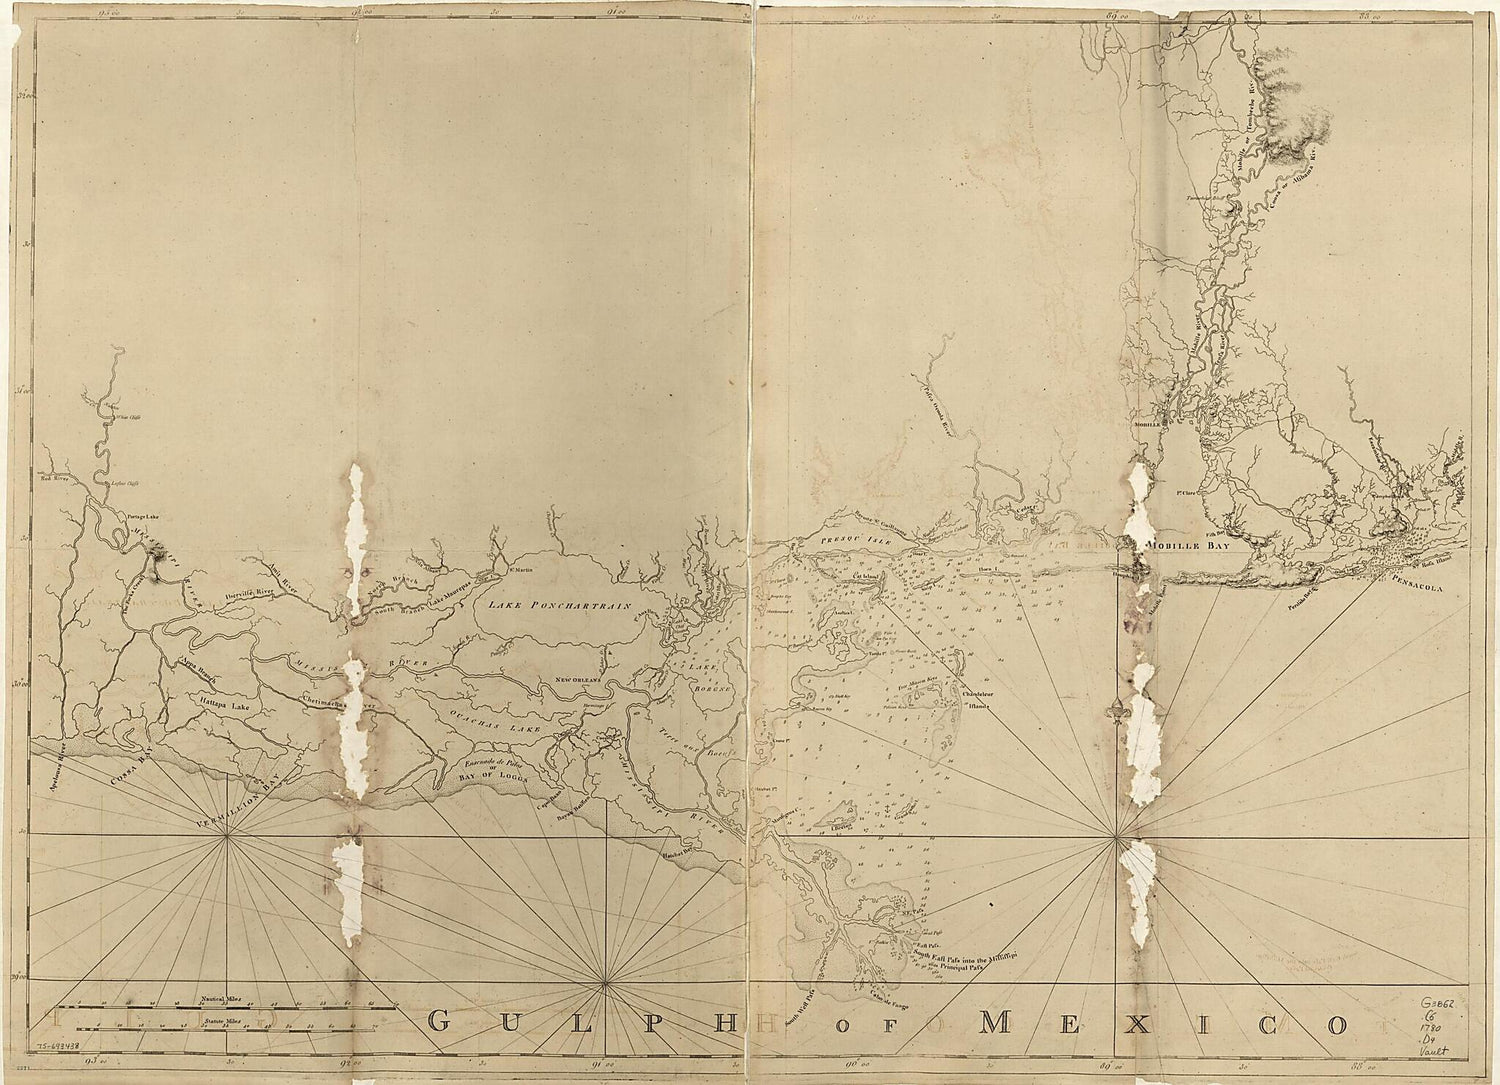 This old map of Chart of the Gulf Coast from Pensacola to Atchafalaya River from 1780 was created by Joseph F. W. (Joseph Frederick Wallet) Des Barres in 1780